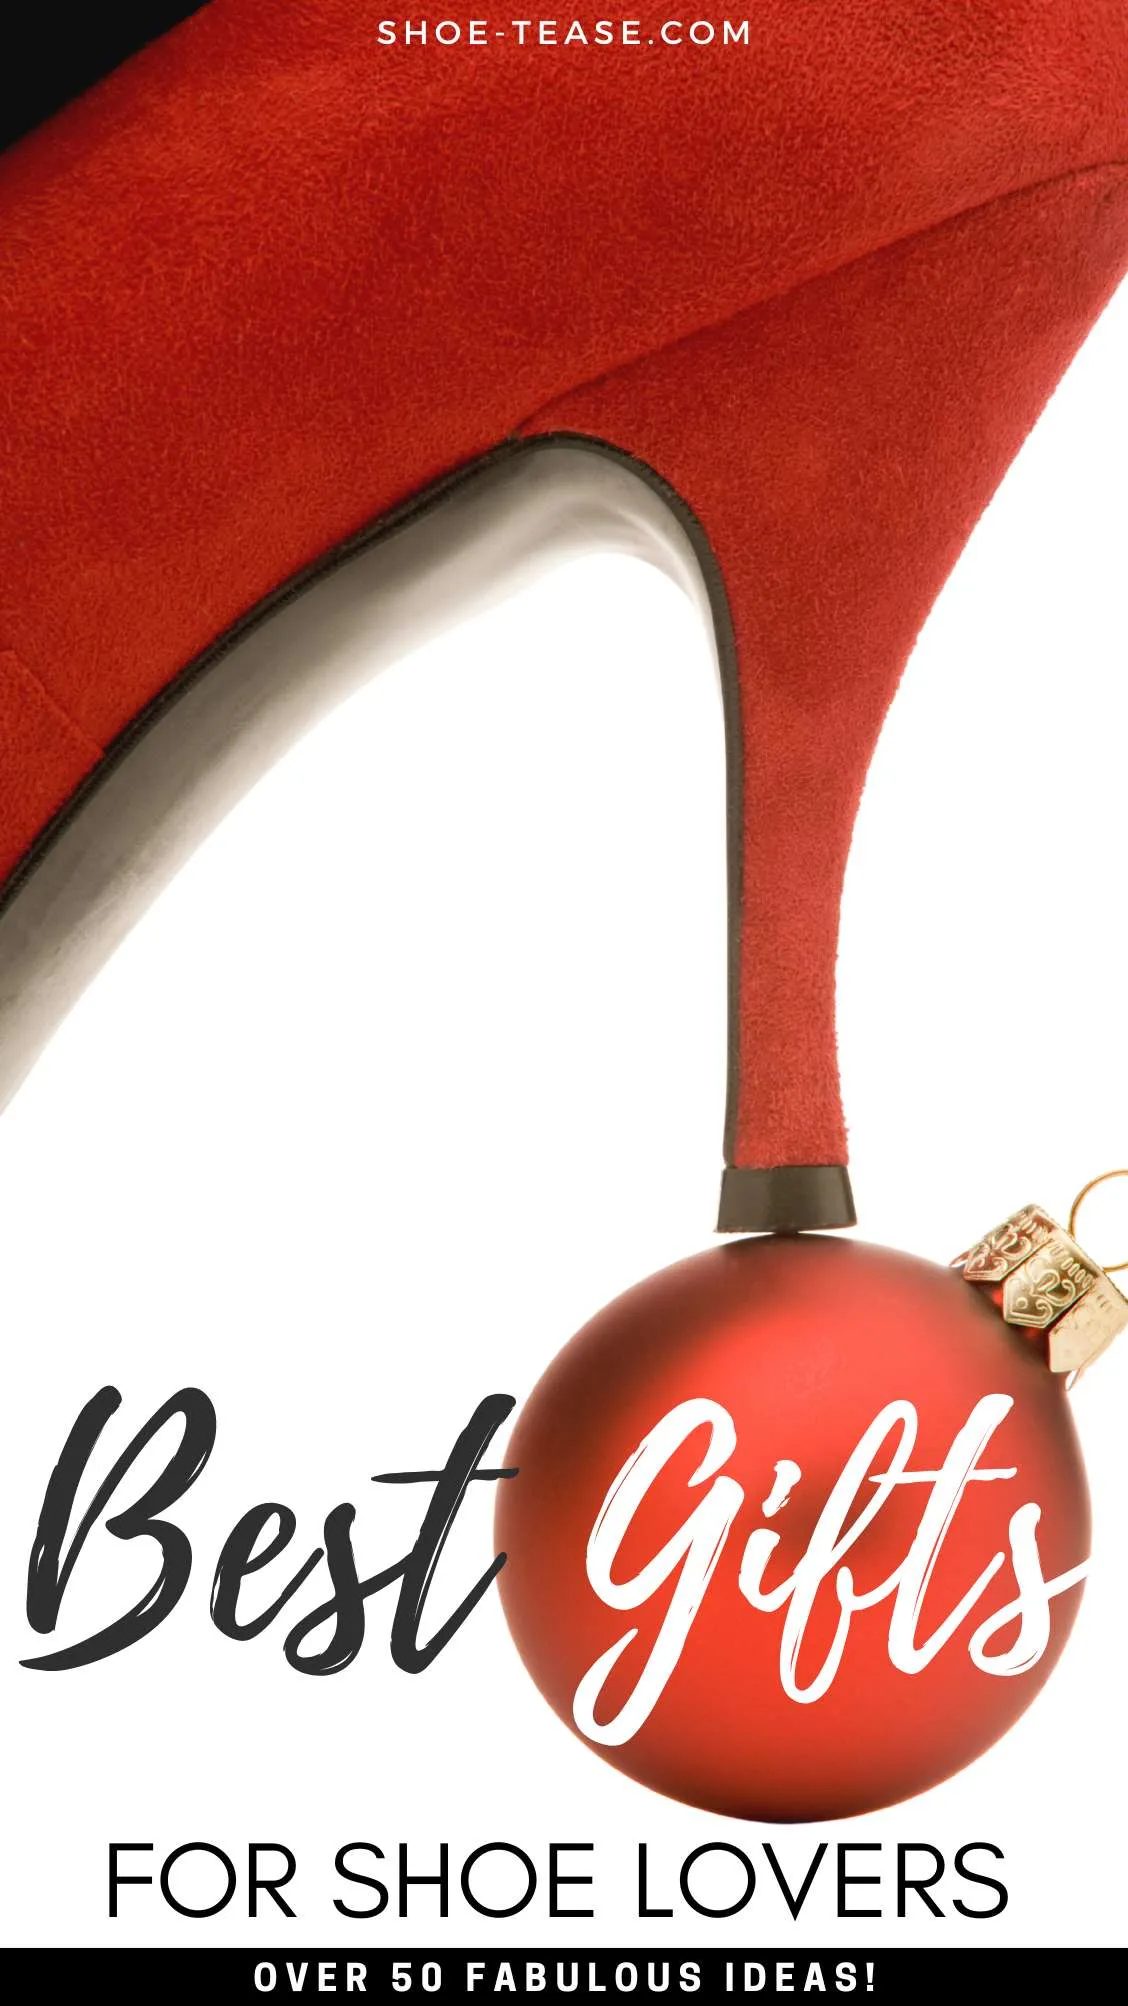 Text reading best gifts for shoe lovers over 50 fabulous ideas over close up of a red suede high heel resting on a red